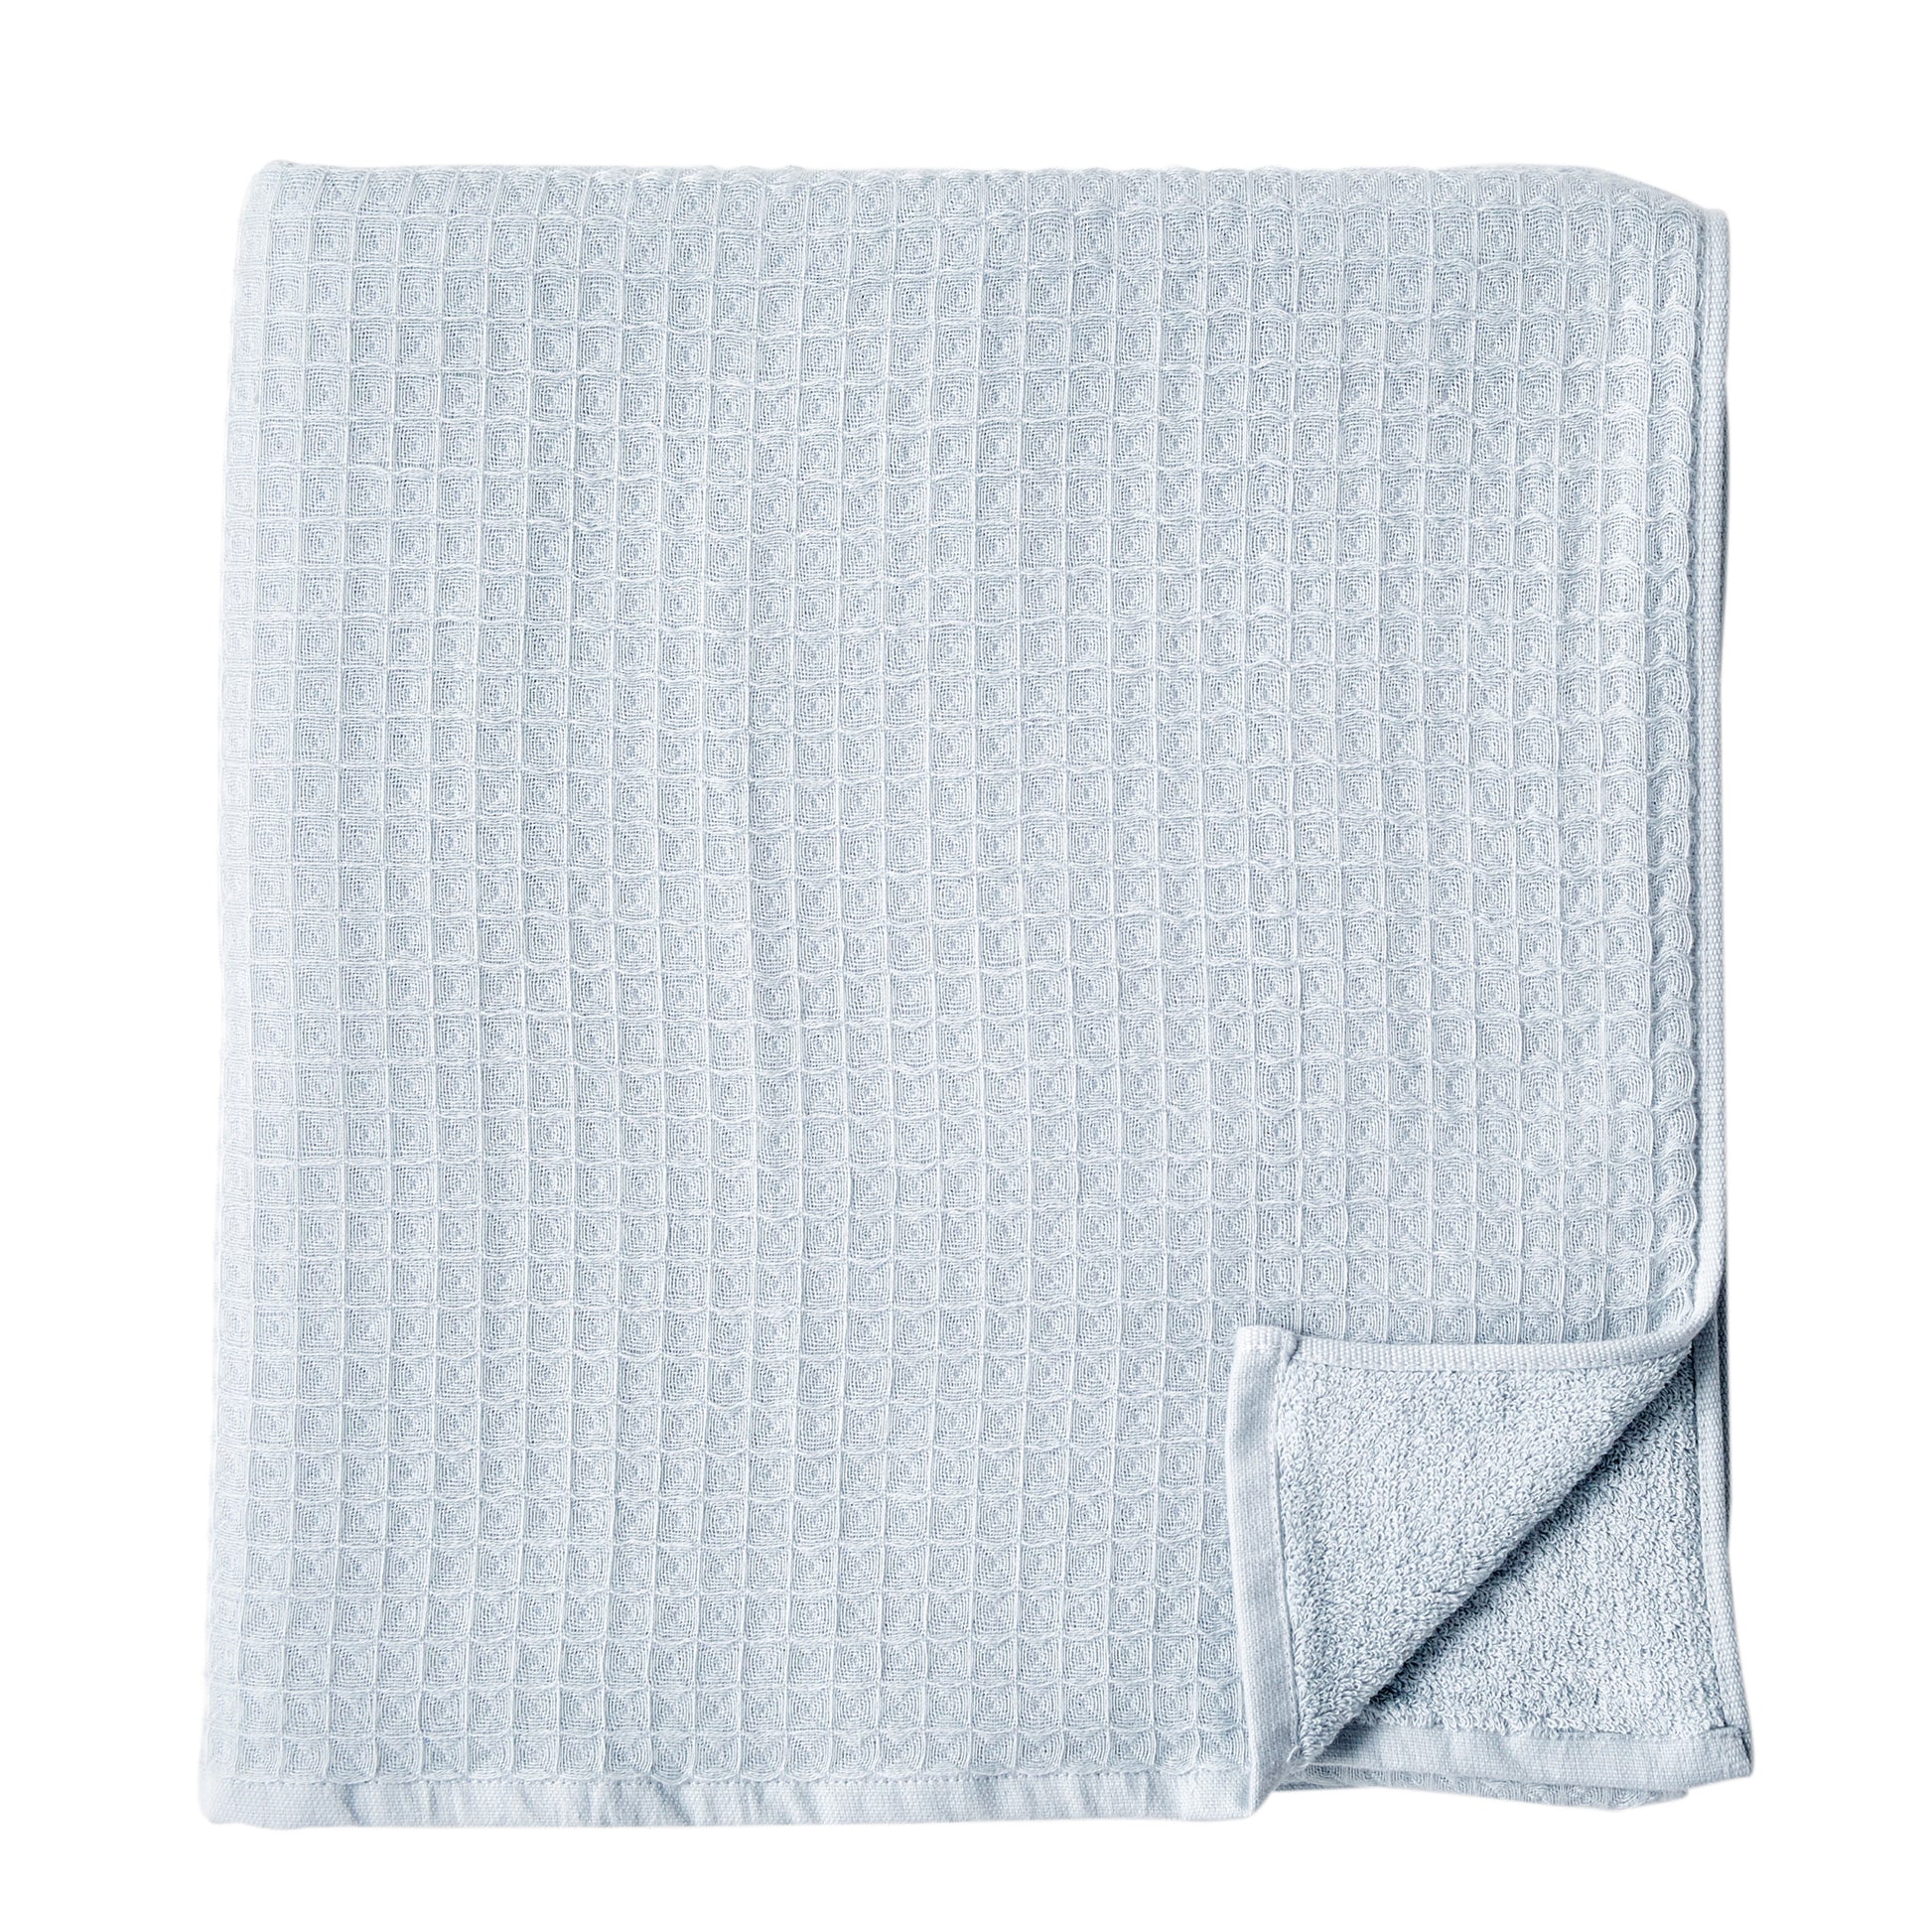 Uchino Super Absorbent Towels Wash Cloth / White